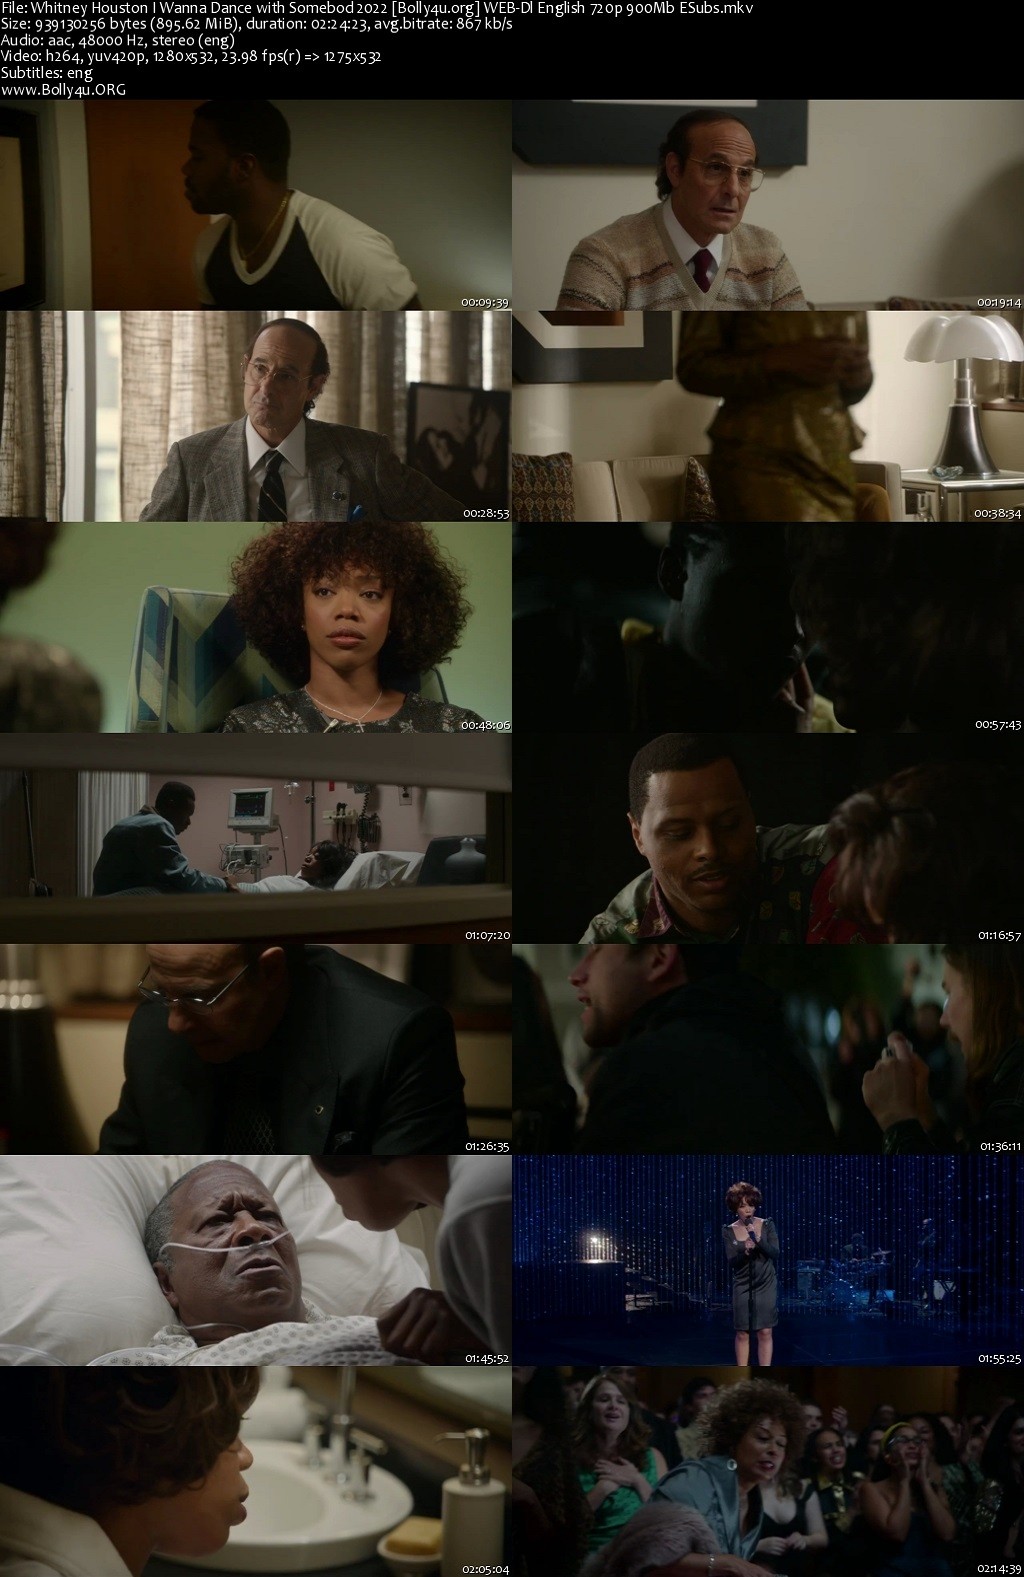 18+ Whitney Houston I Wanna Dance with Somebod 2022 WEB-DL English Full Movie Download 720p 480p